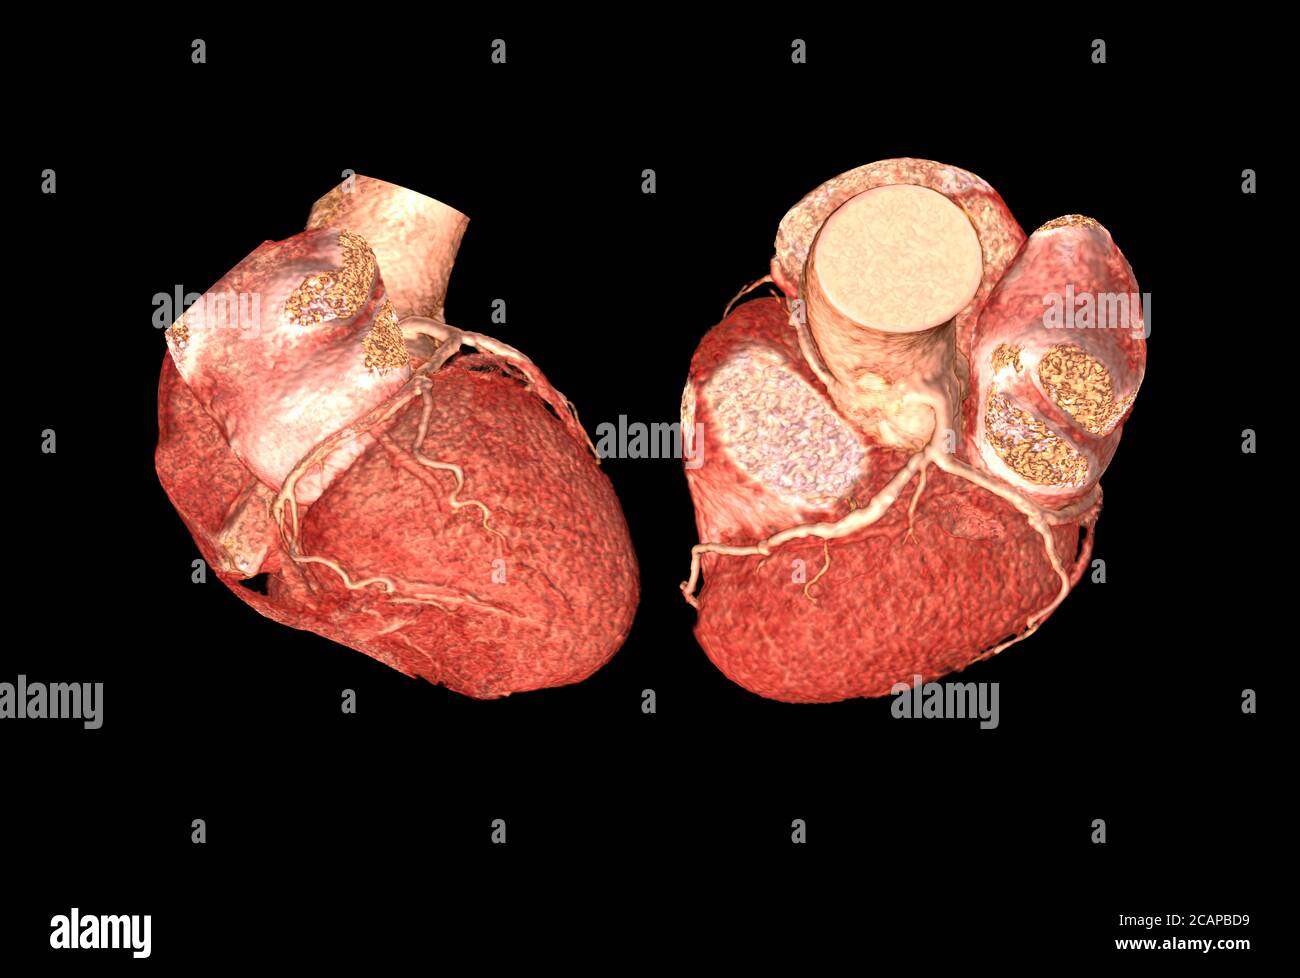 Lateral ad Top view of CTA Coronary artery  3D rendering image isolated o black backgroud for finding coronary artery disease. Stock Photo